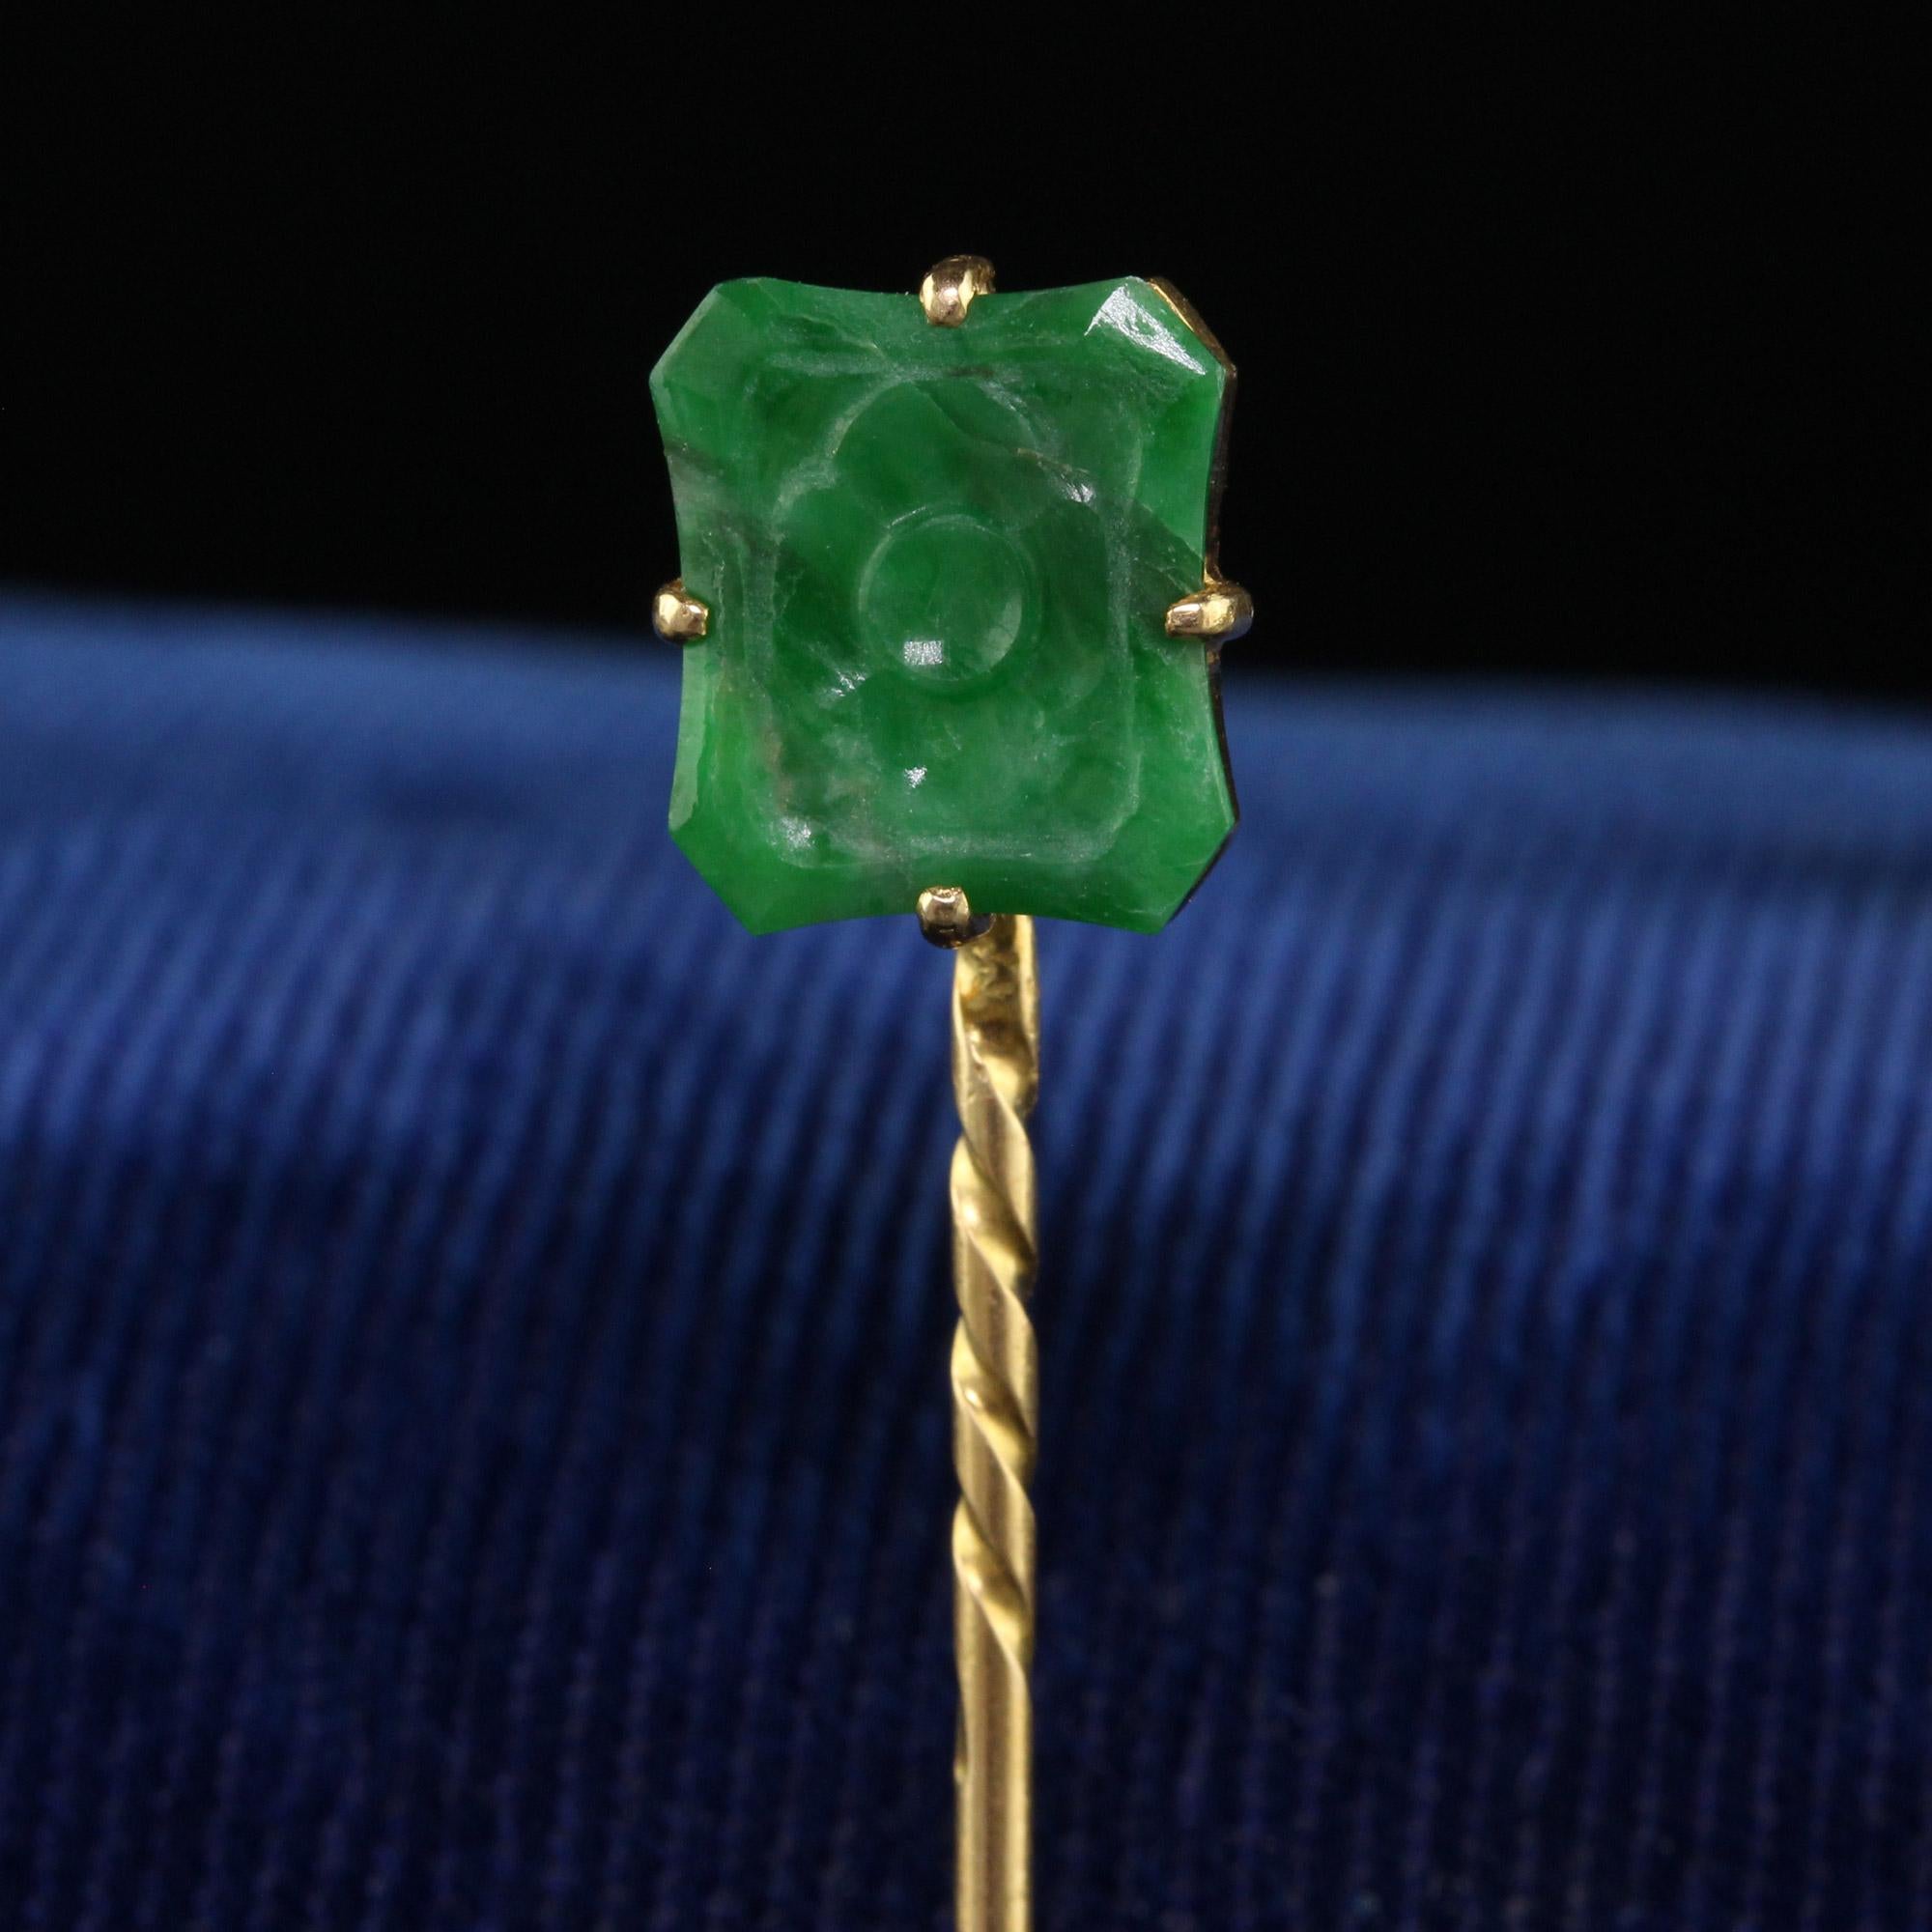 Beautiful Vintage Mid Century 18K Yellow Gold Carved Jade Floral Stick Pin. This beautiful stick pin is crafted in 18k yellow gold. The pin holds a beautiful carved natural jade that has a flower design on it. The stick pin is in good condition and